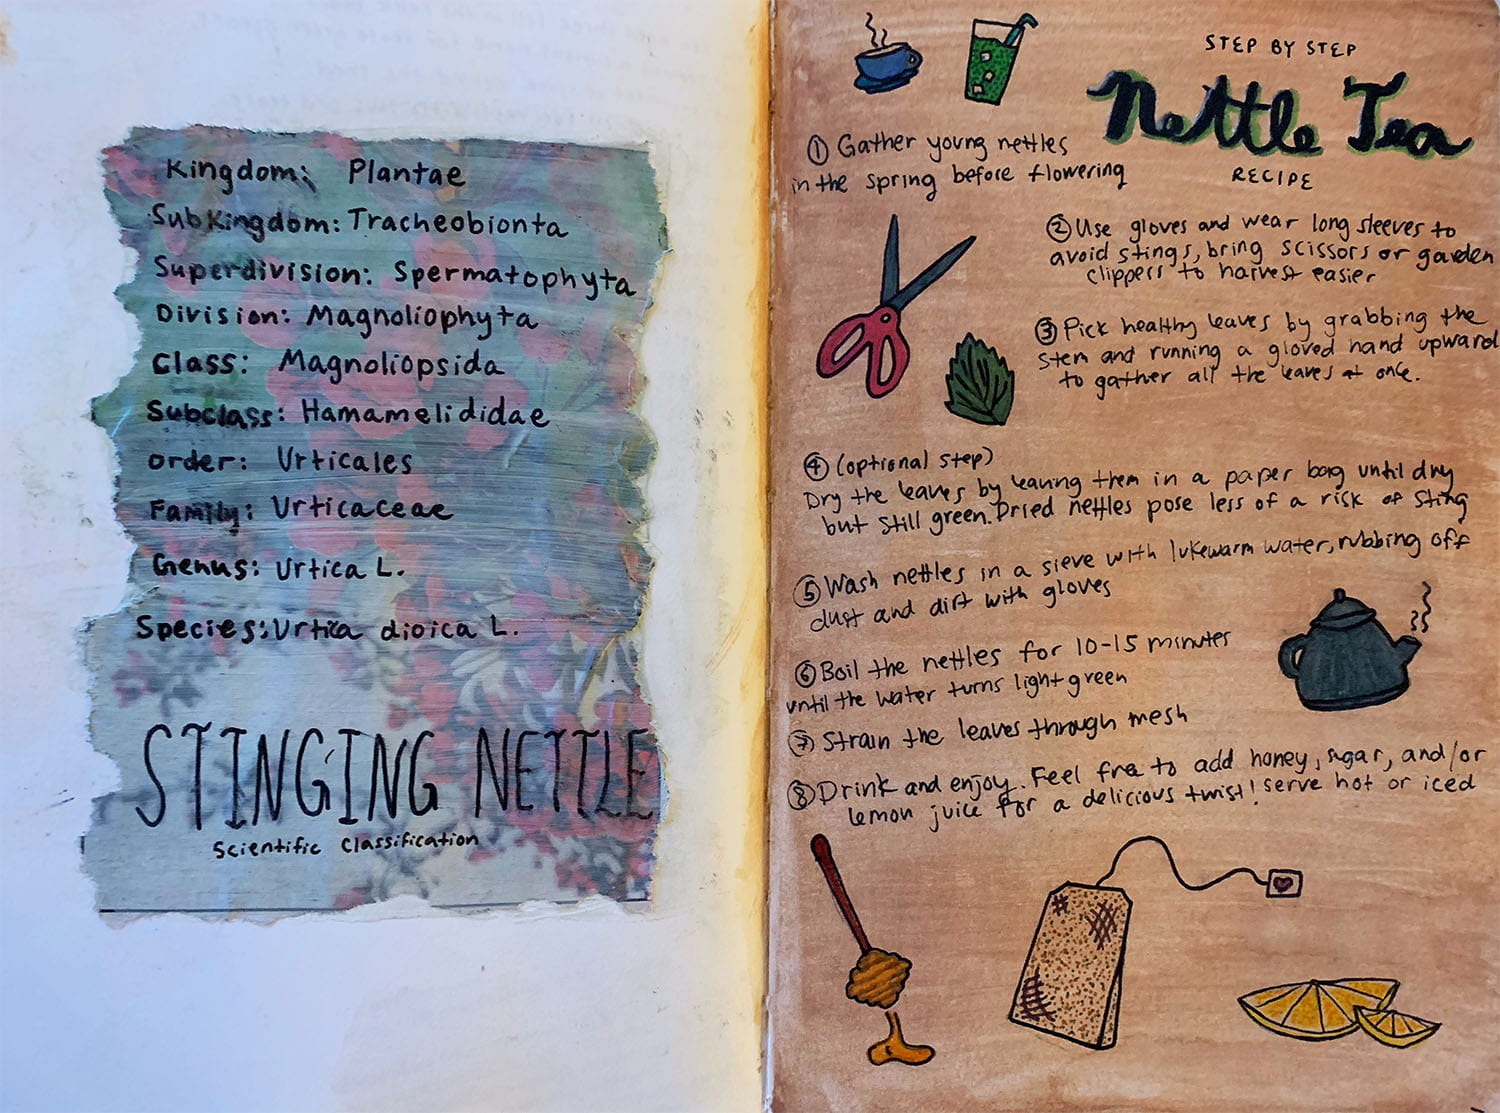 journal entry with notes about stinging nettles, including how to harvest and make tea with them